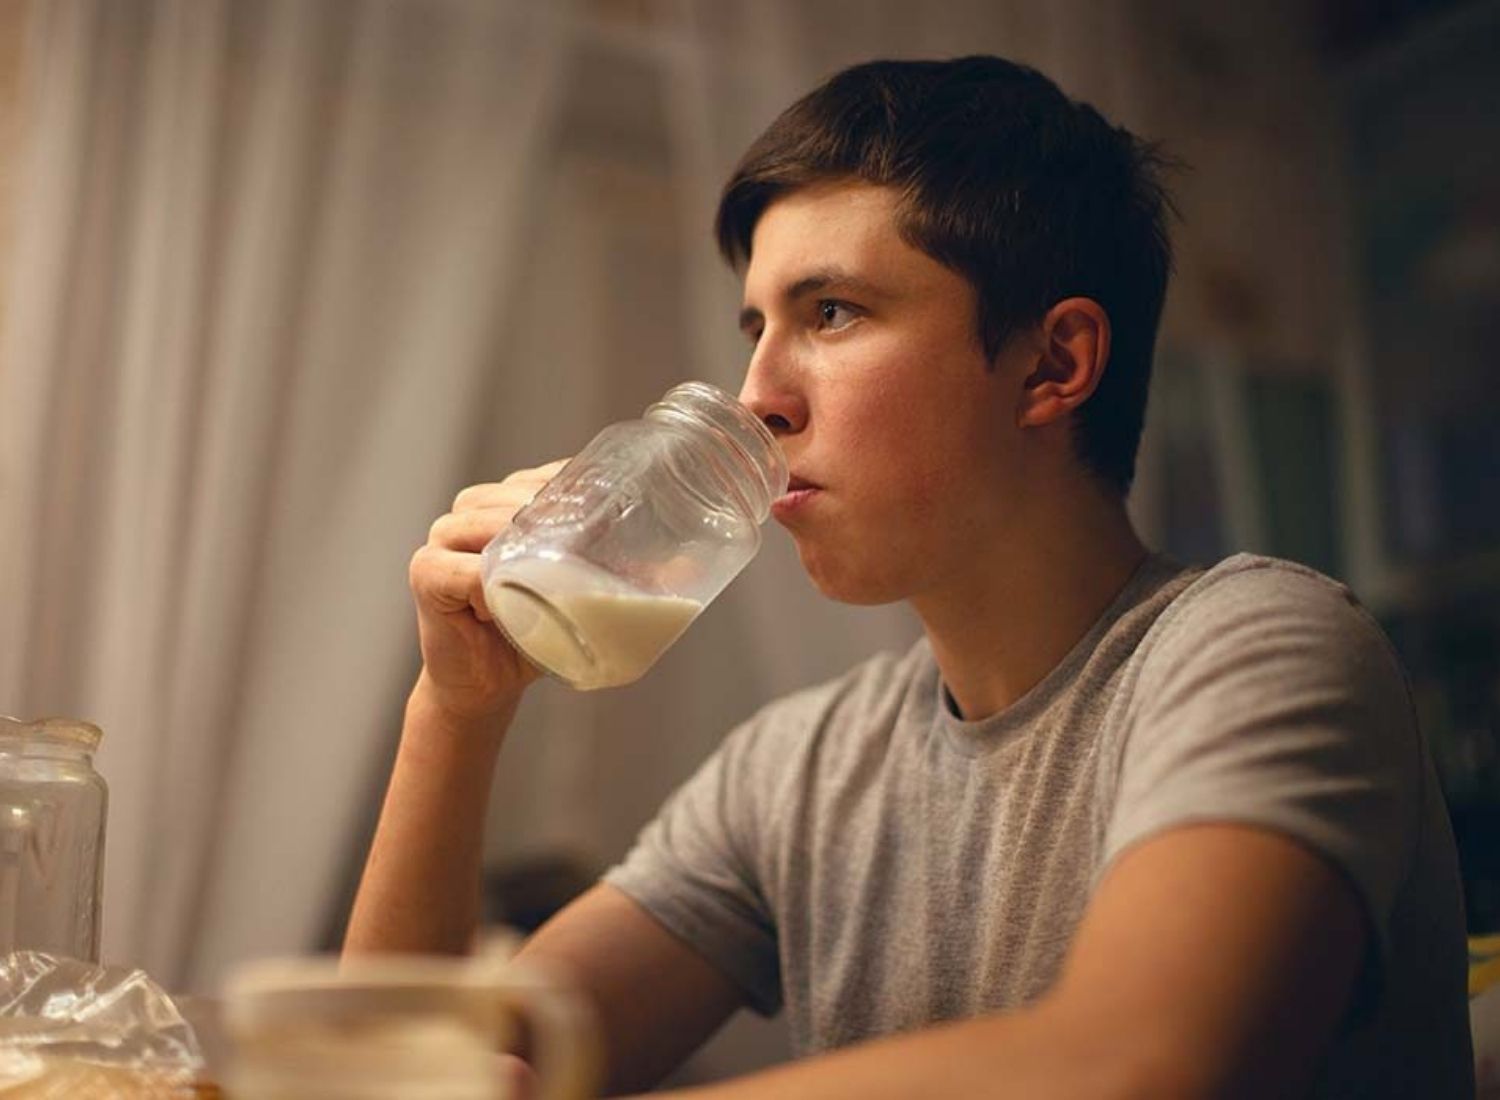 Should You Drink Milk Before Bed?